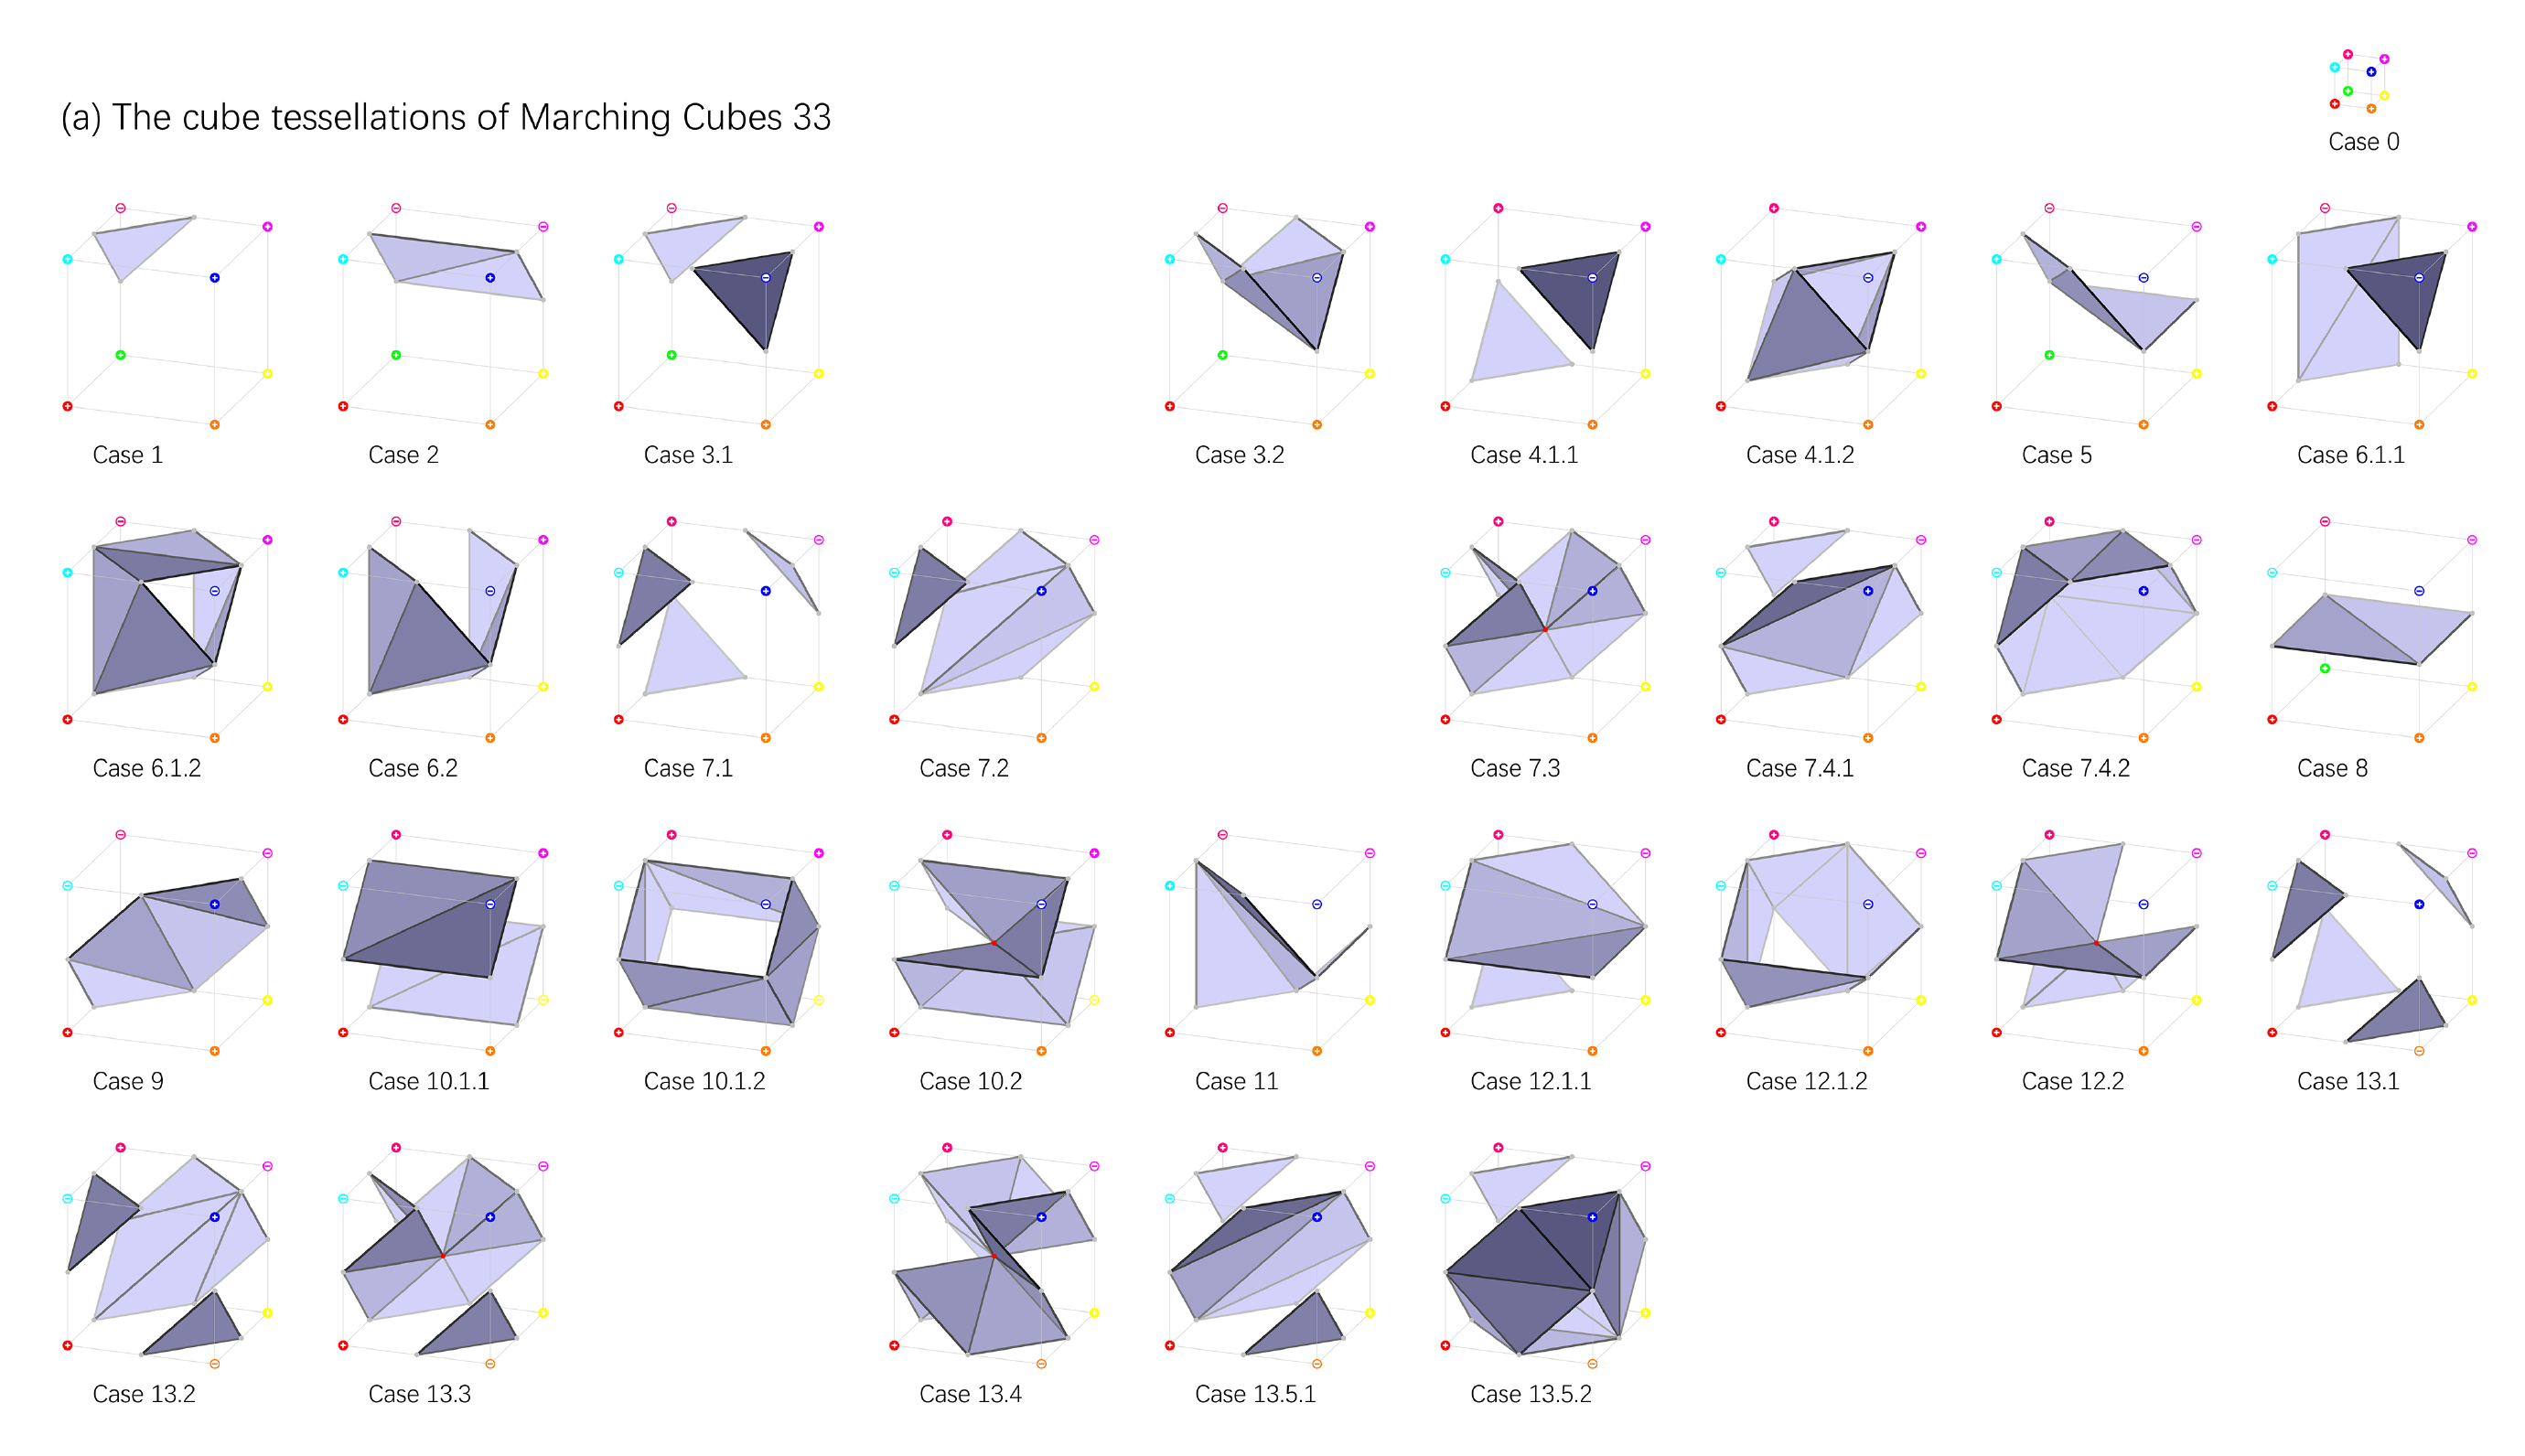 Marching Cubes 33